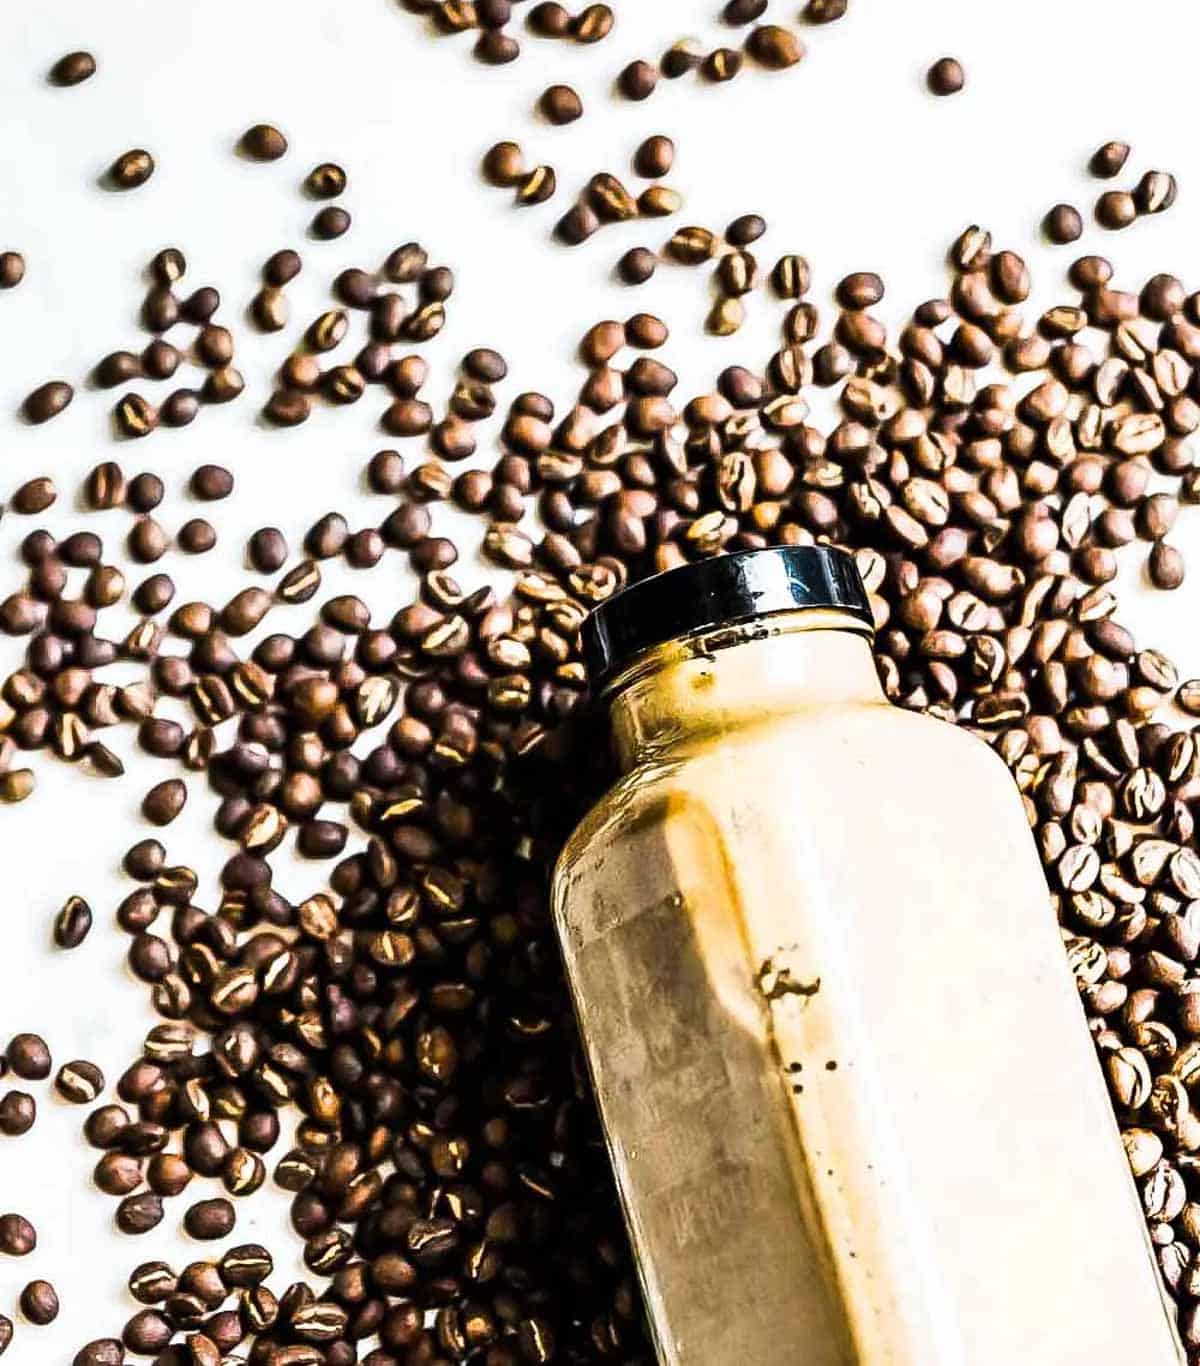 brown smoothie in a glass jar with a black lid on a bed of coffee beans with no dairy in it.